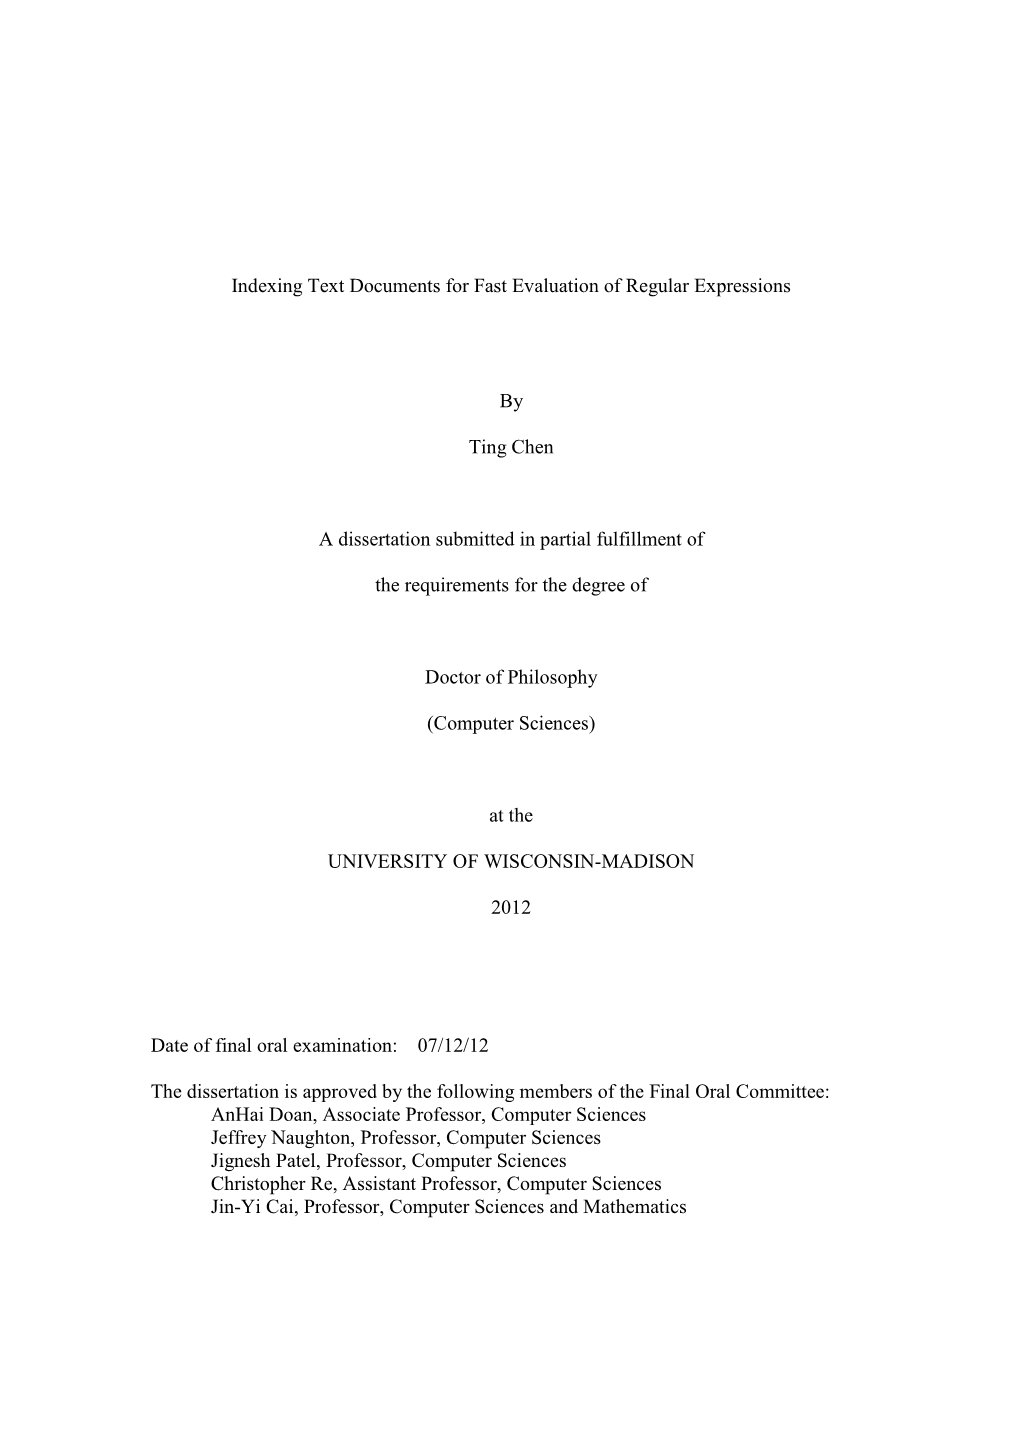 Indexing Text Documents for Fast Evaluation of Regular Expressions by Ting Chen a Dissertation Submitted in Partial Fulfillment